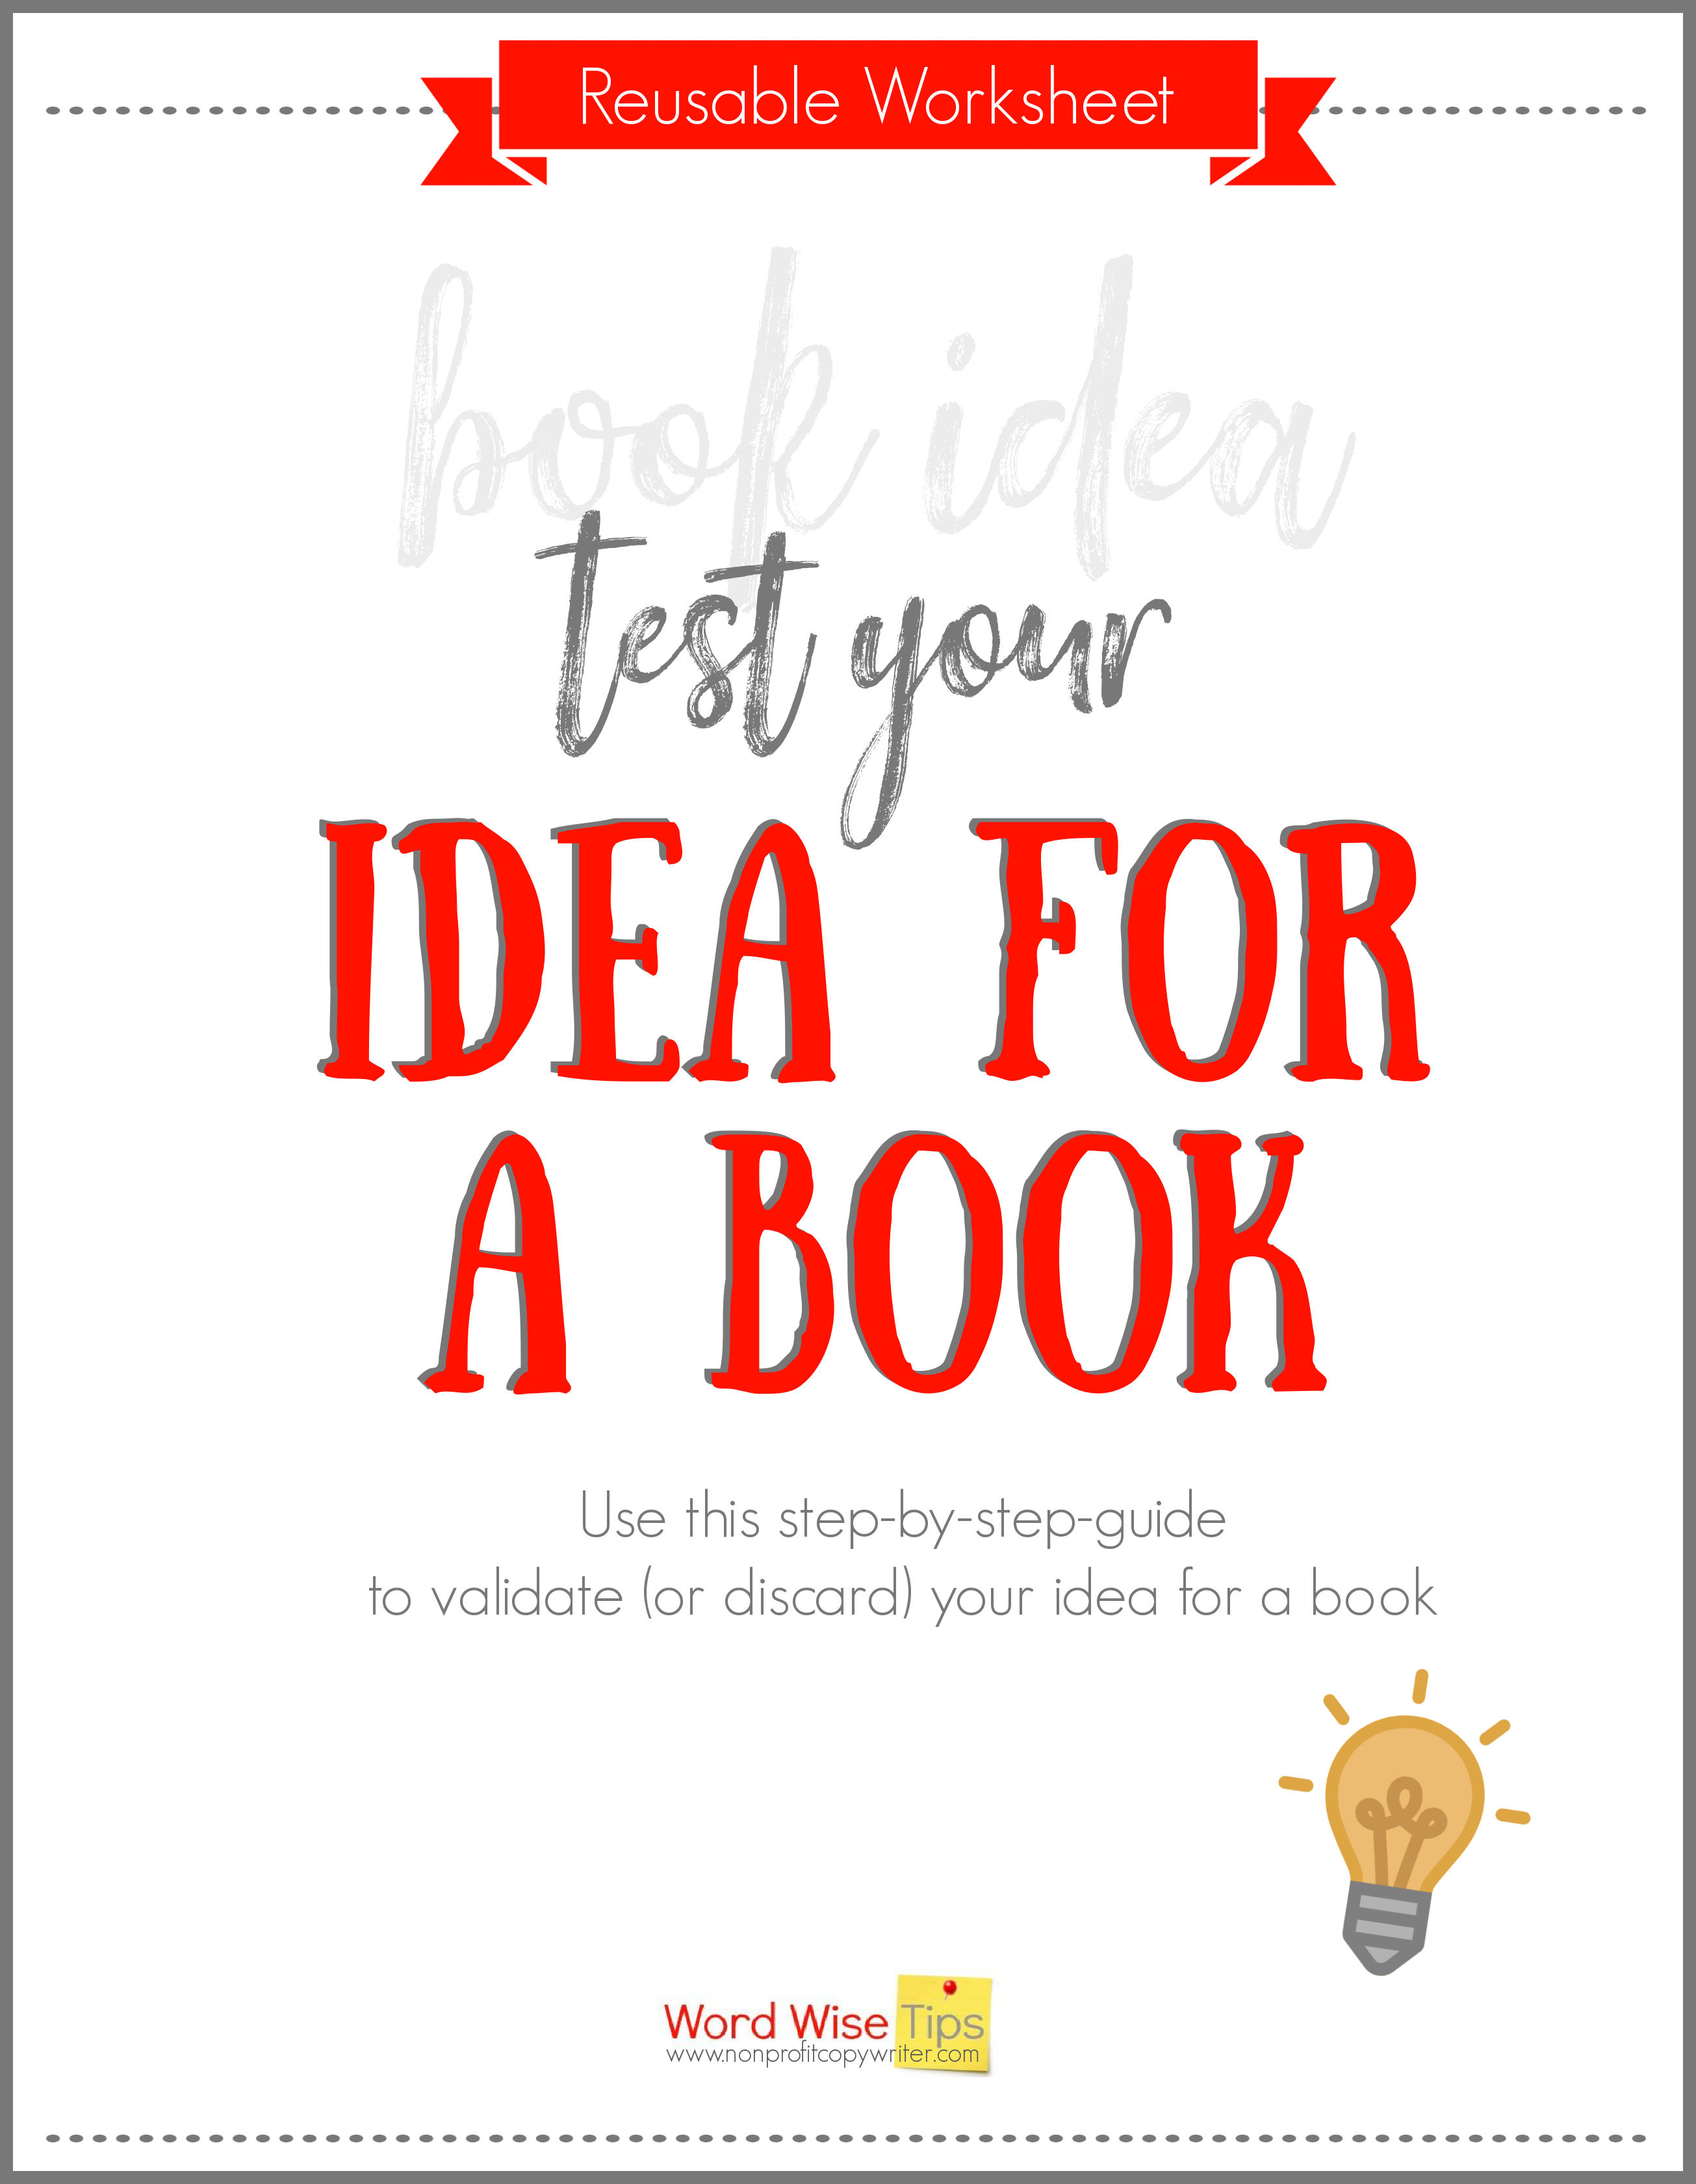 Test your idea for a book